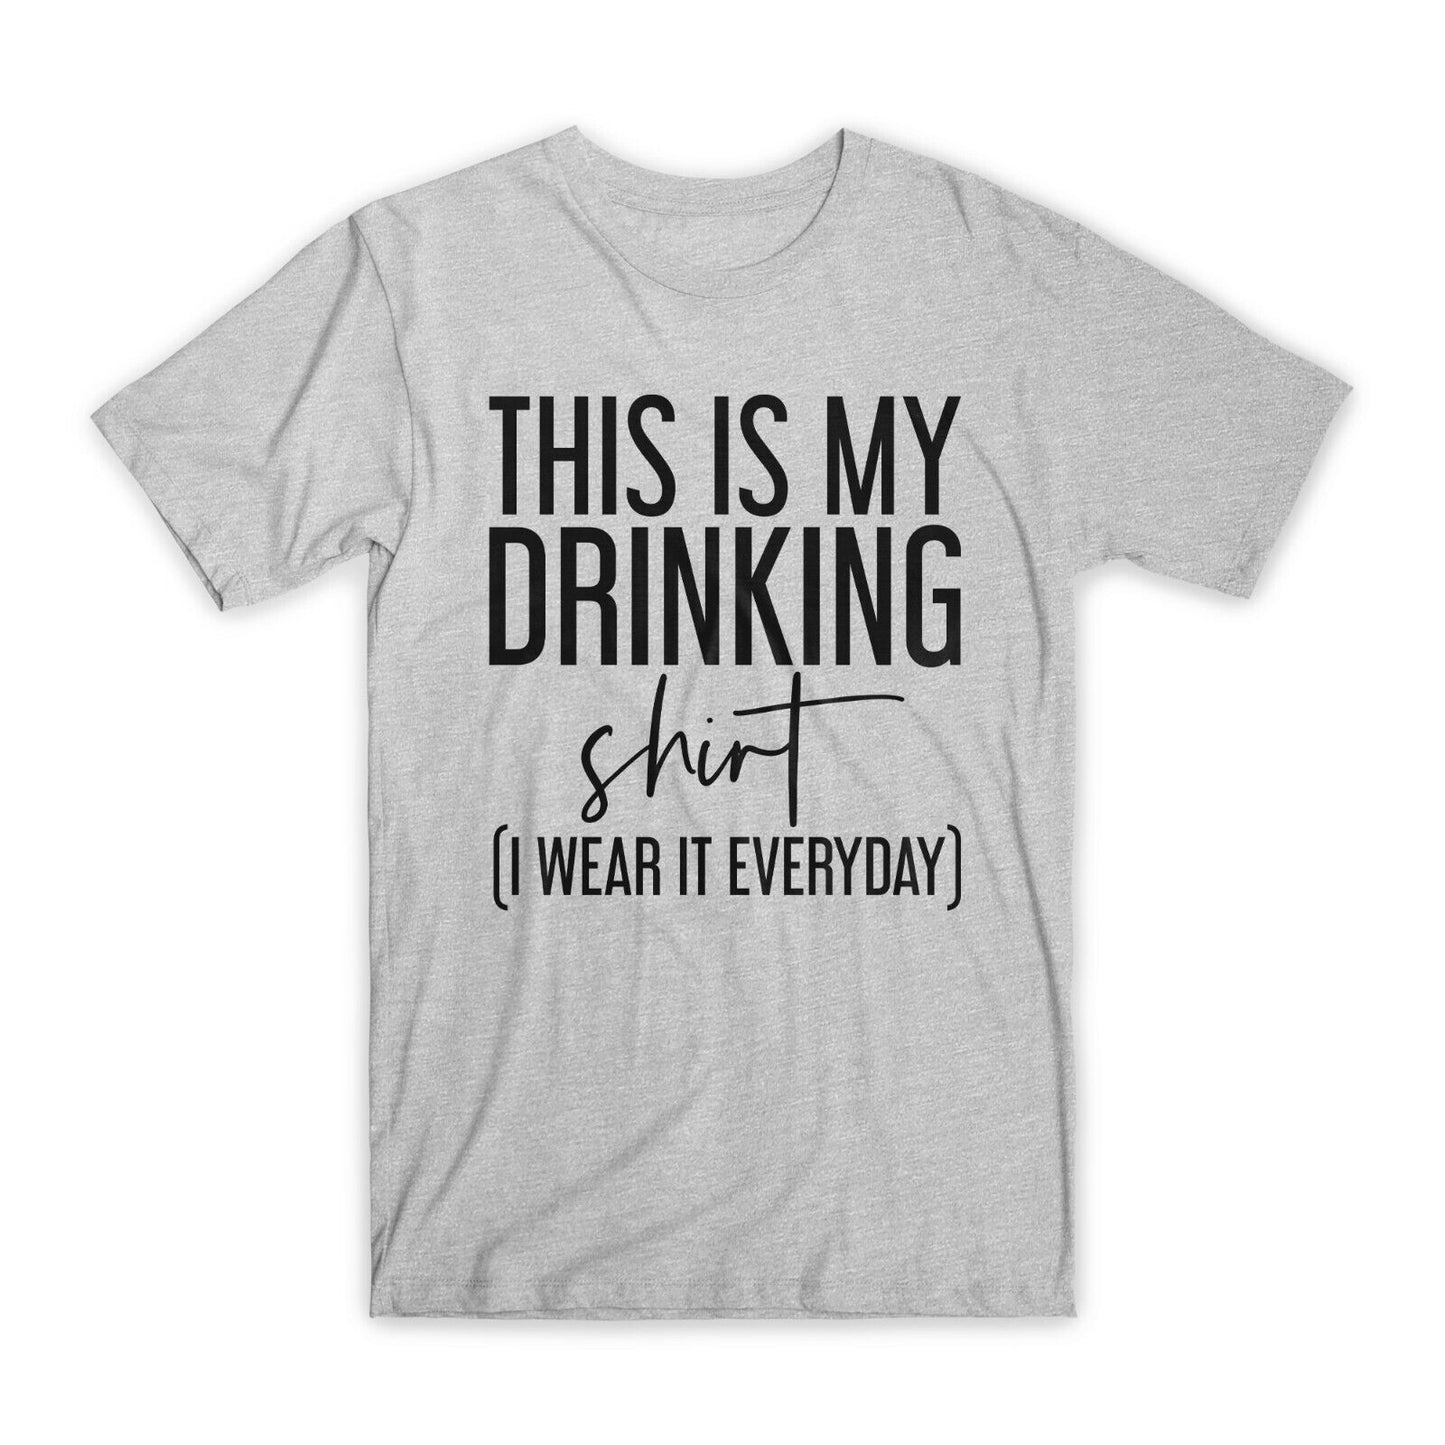 This is My Drinking Shirt T-Shirt Premium Cotton Crew Neck Funny Tees Gifts NEW